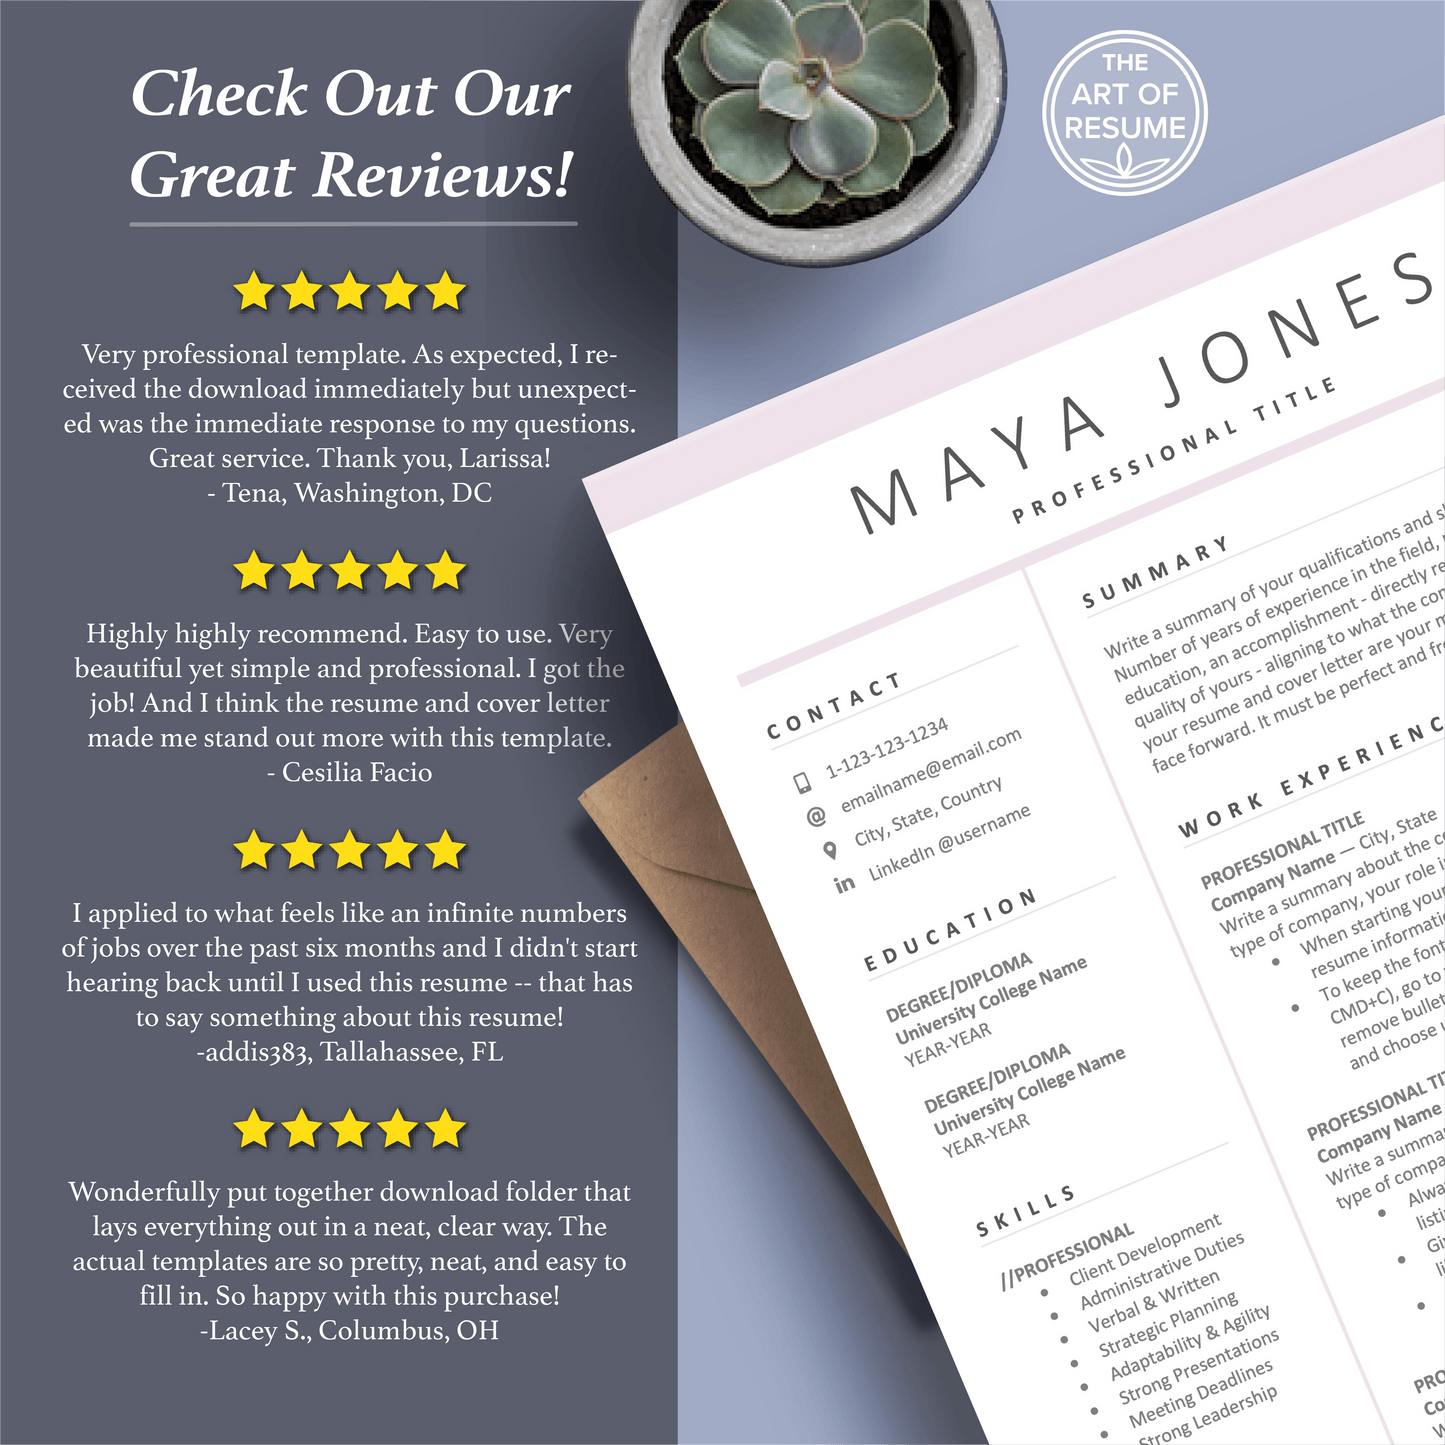 The Art of Resume Templates | Professional Simple Pink Resume CV Templates Online 5-Star Reviews